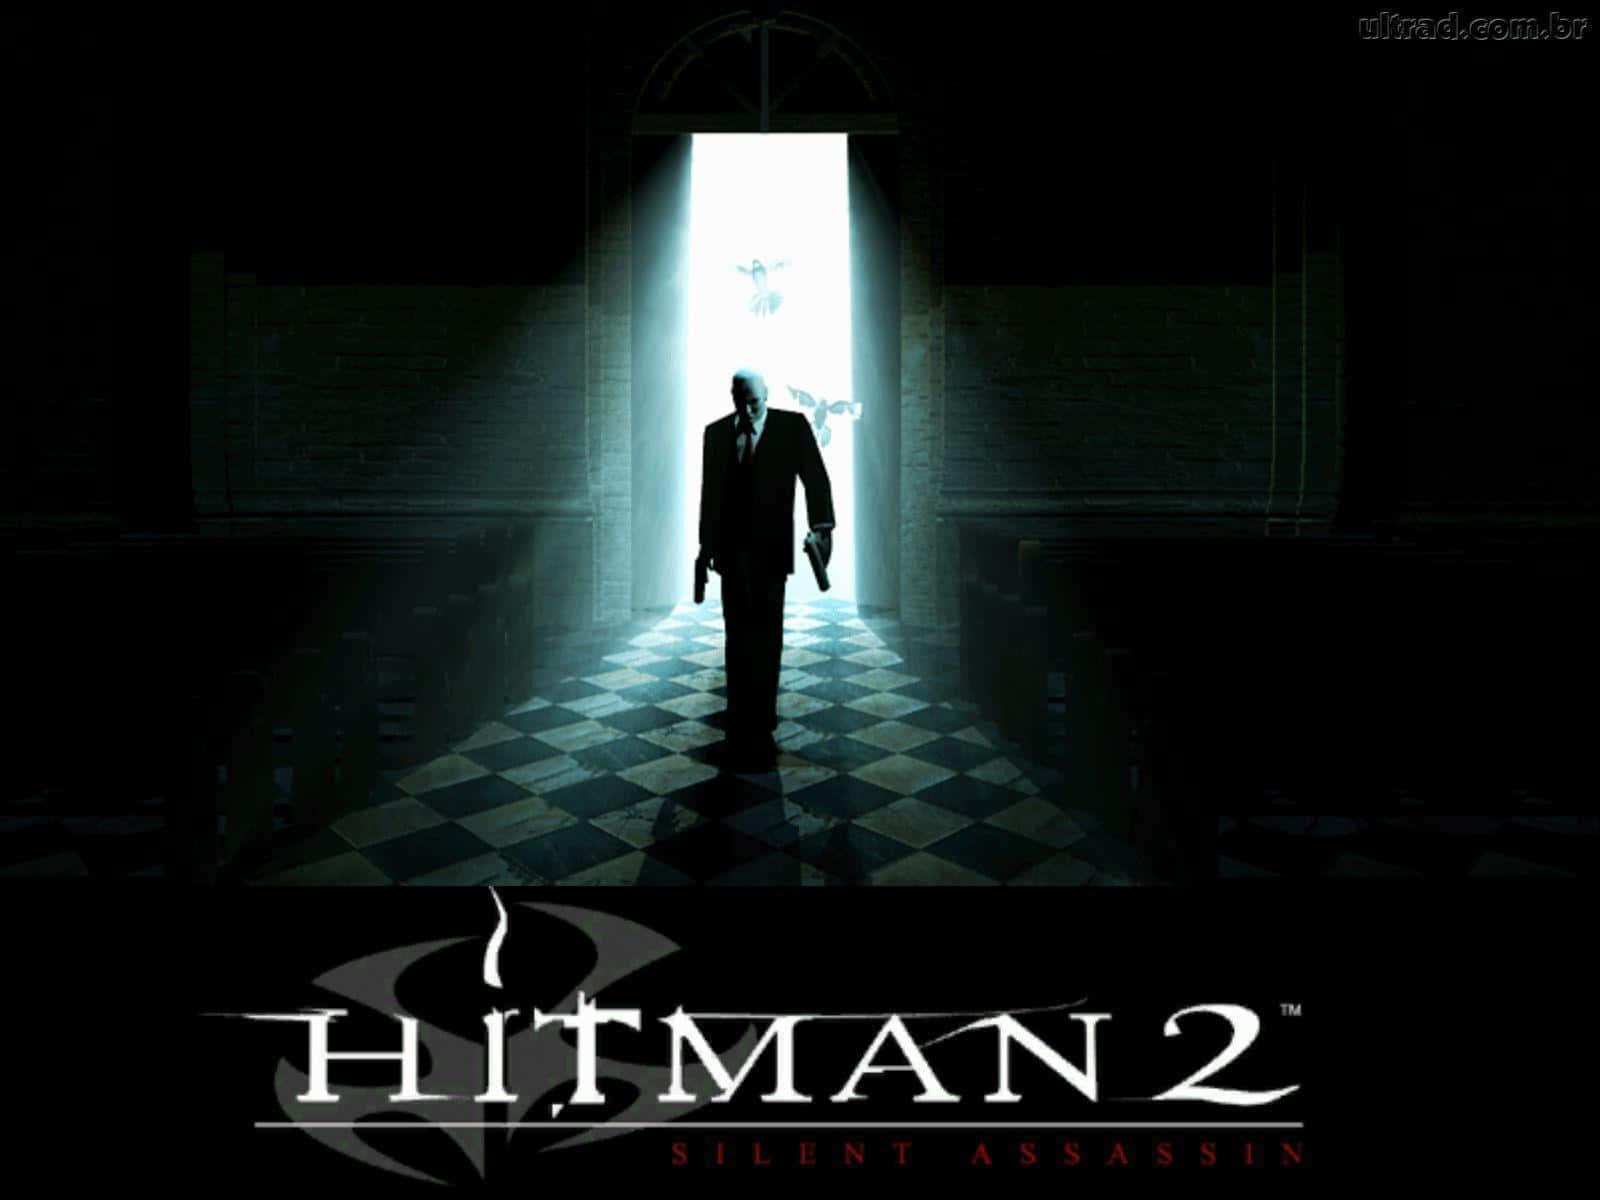 “Take on the challenge of becoming the world’s greatest assassin with Hitman 2”